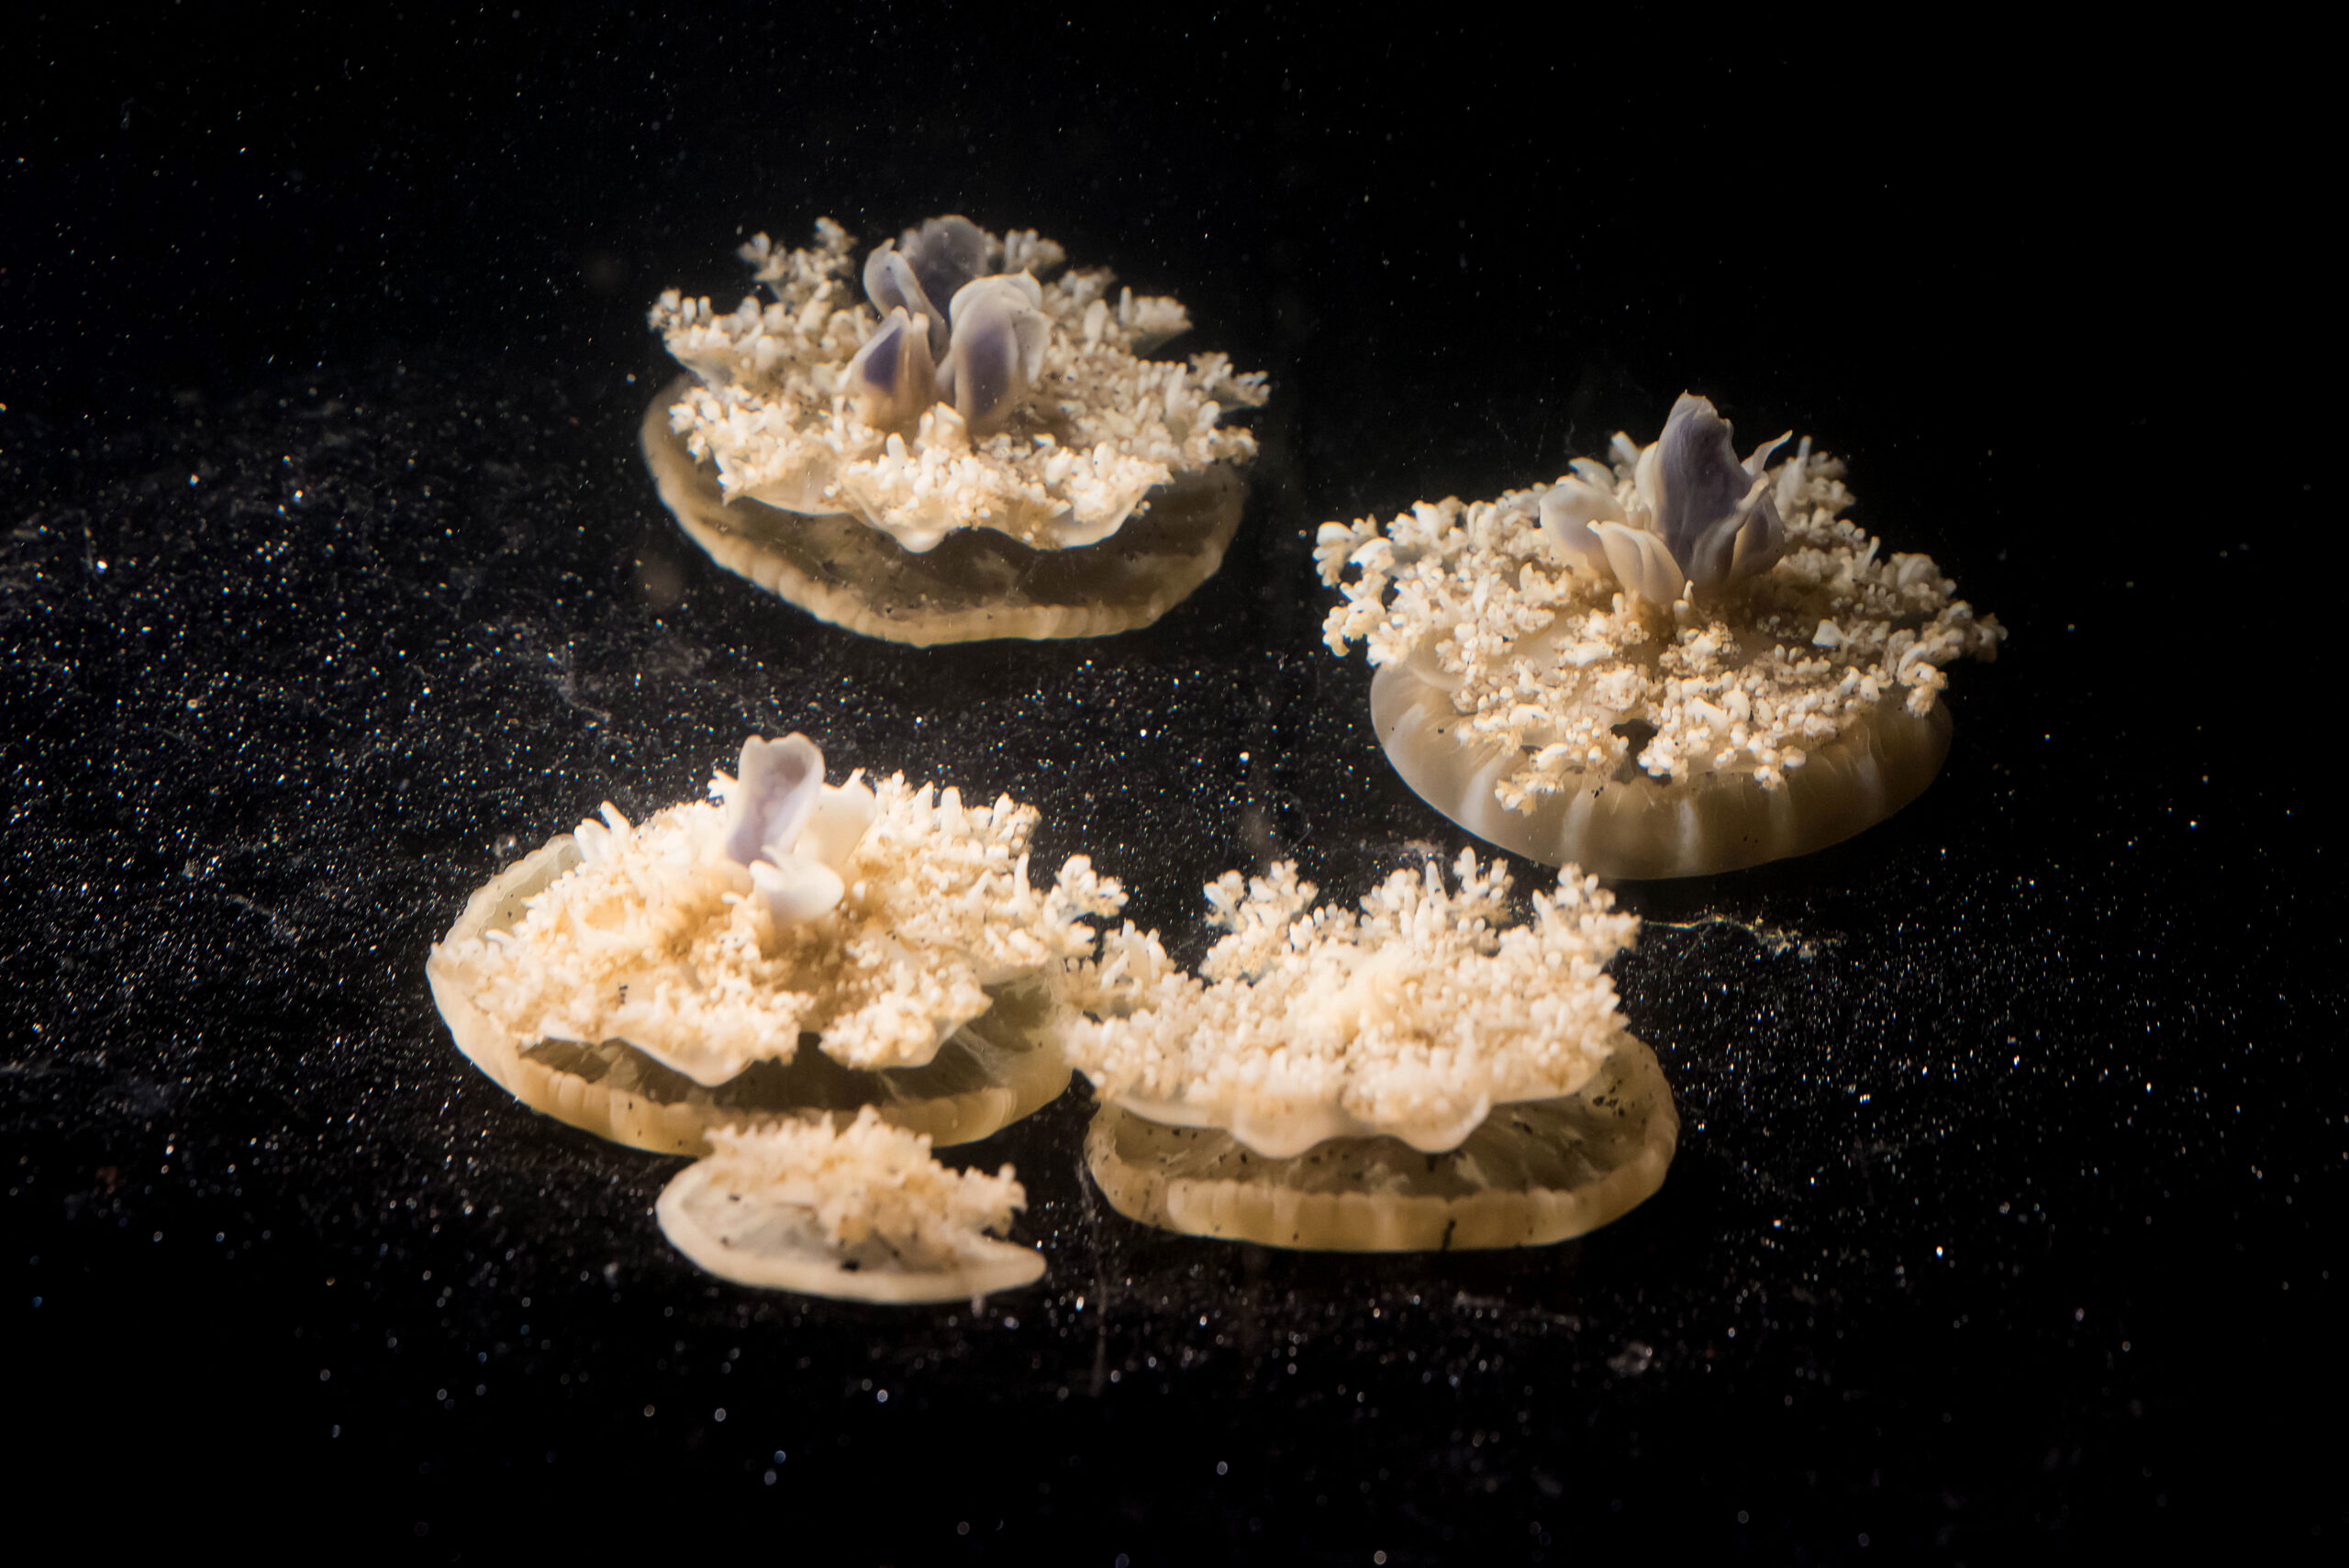 These jellyfish don’t have brains, but still somehow seem to sleep